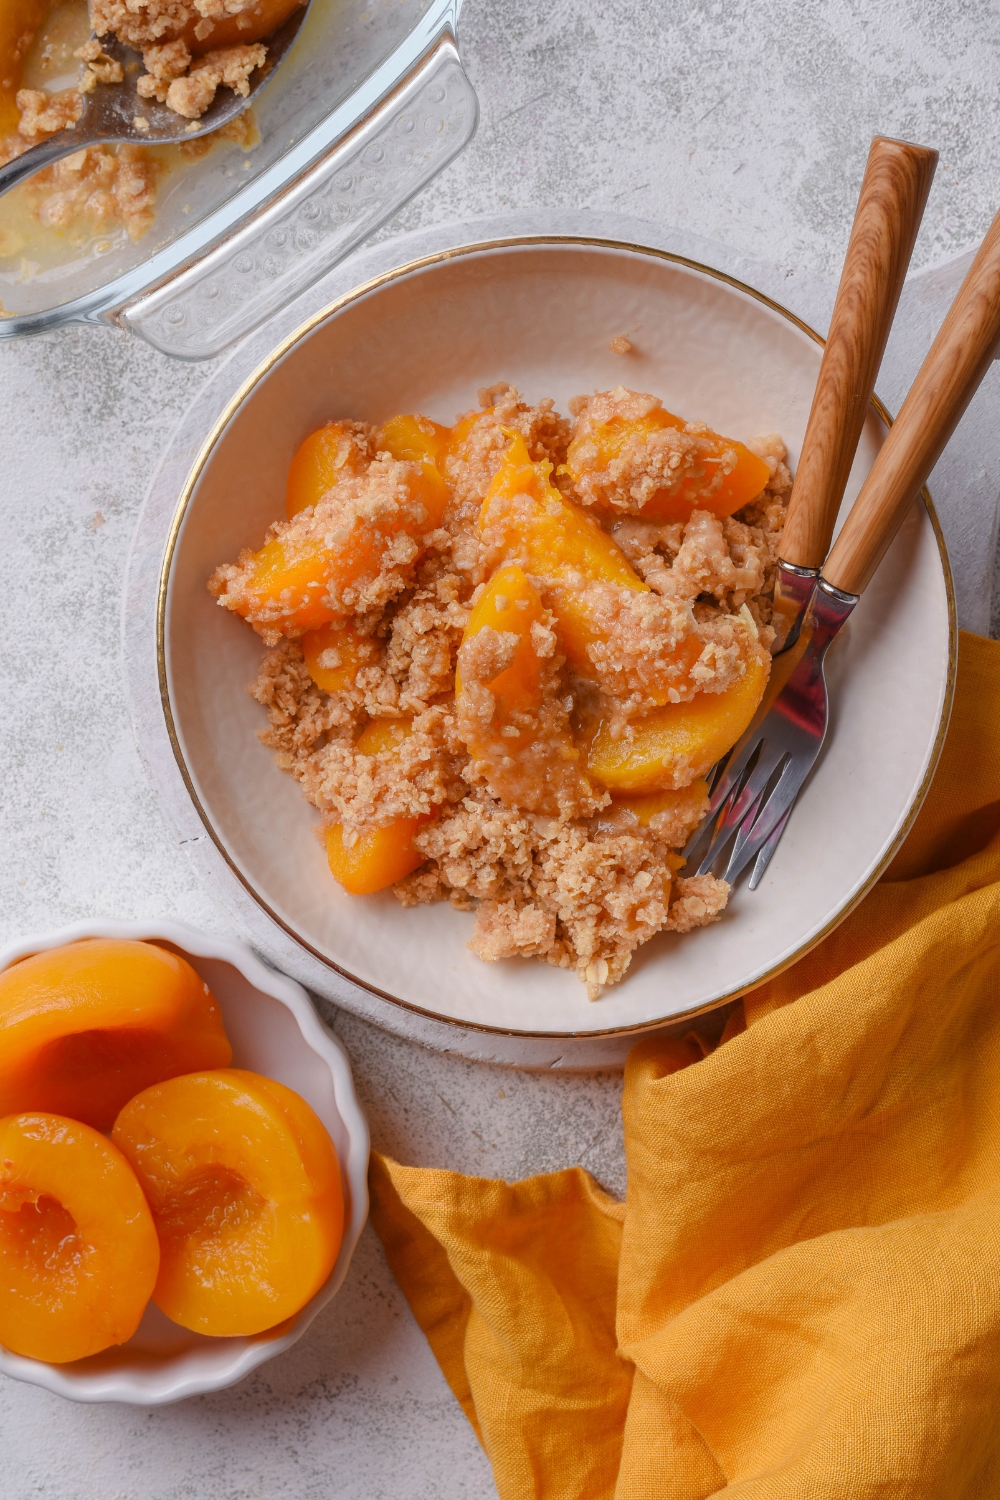 A white bowl holds peach crisp with canned peaches. Two forks rest in the bowl. A small bowl nearby holds extra canned peaches.